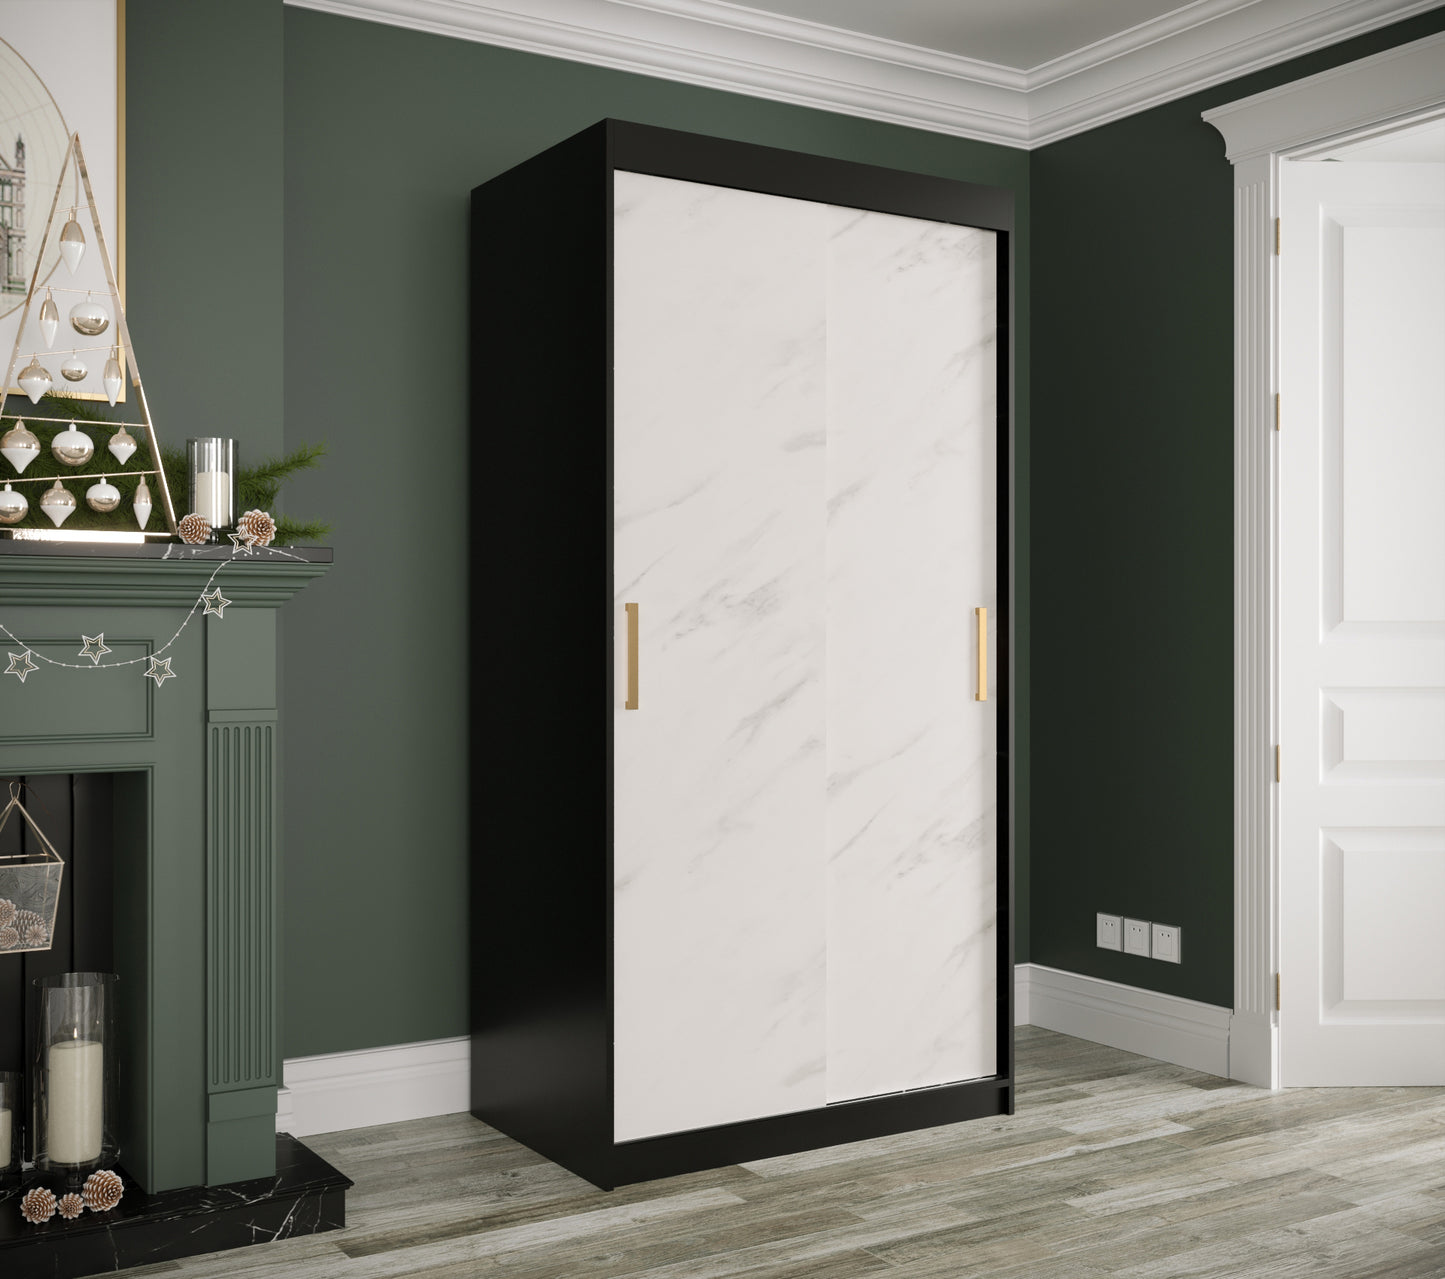 MARBLE T - Wardrobe with Sliding Doors, Shelves, 2 x Hanging Rails and Optional Drawers >100cm<